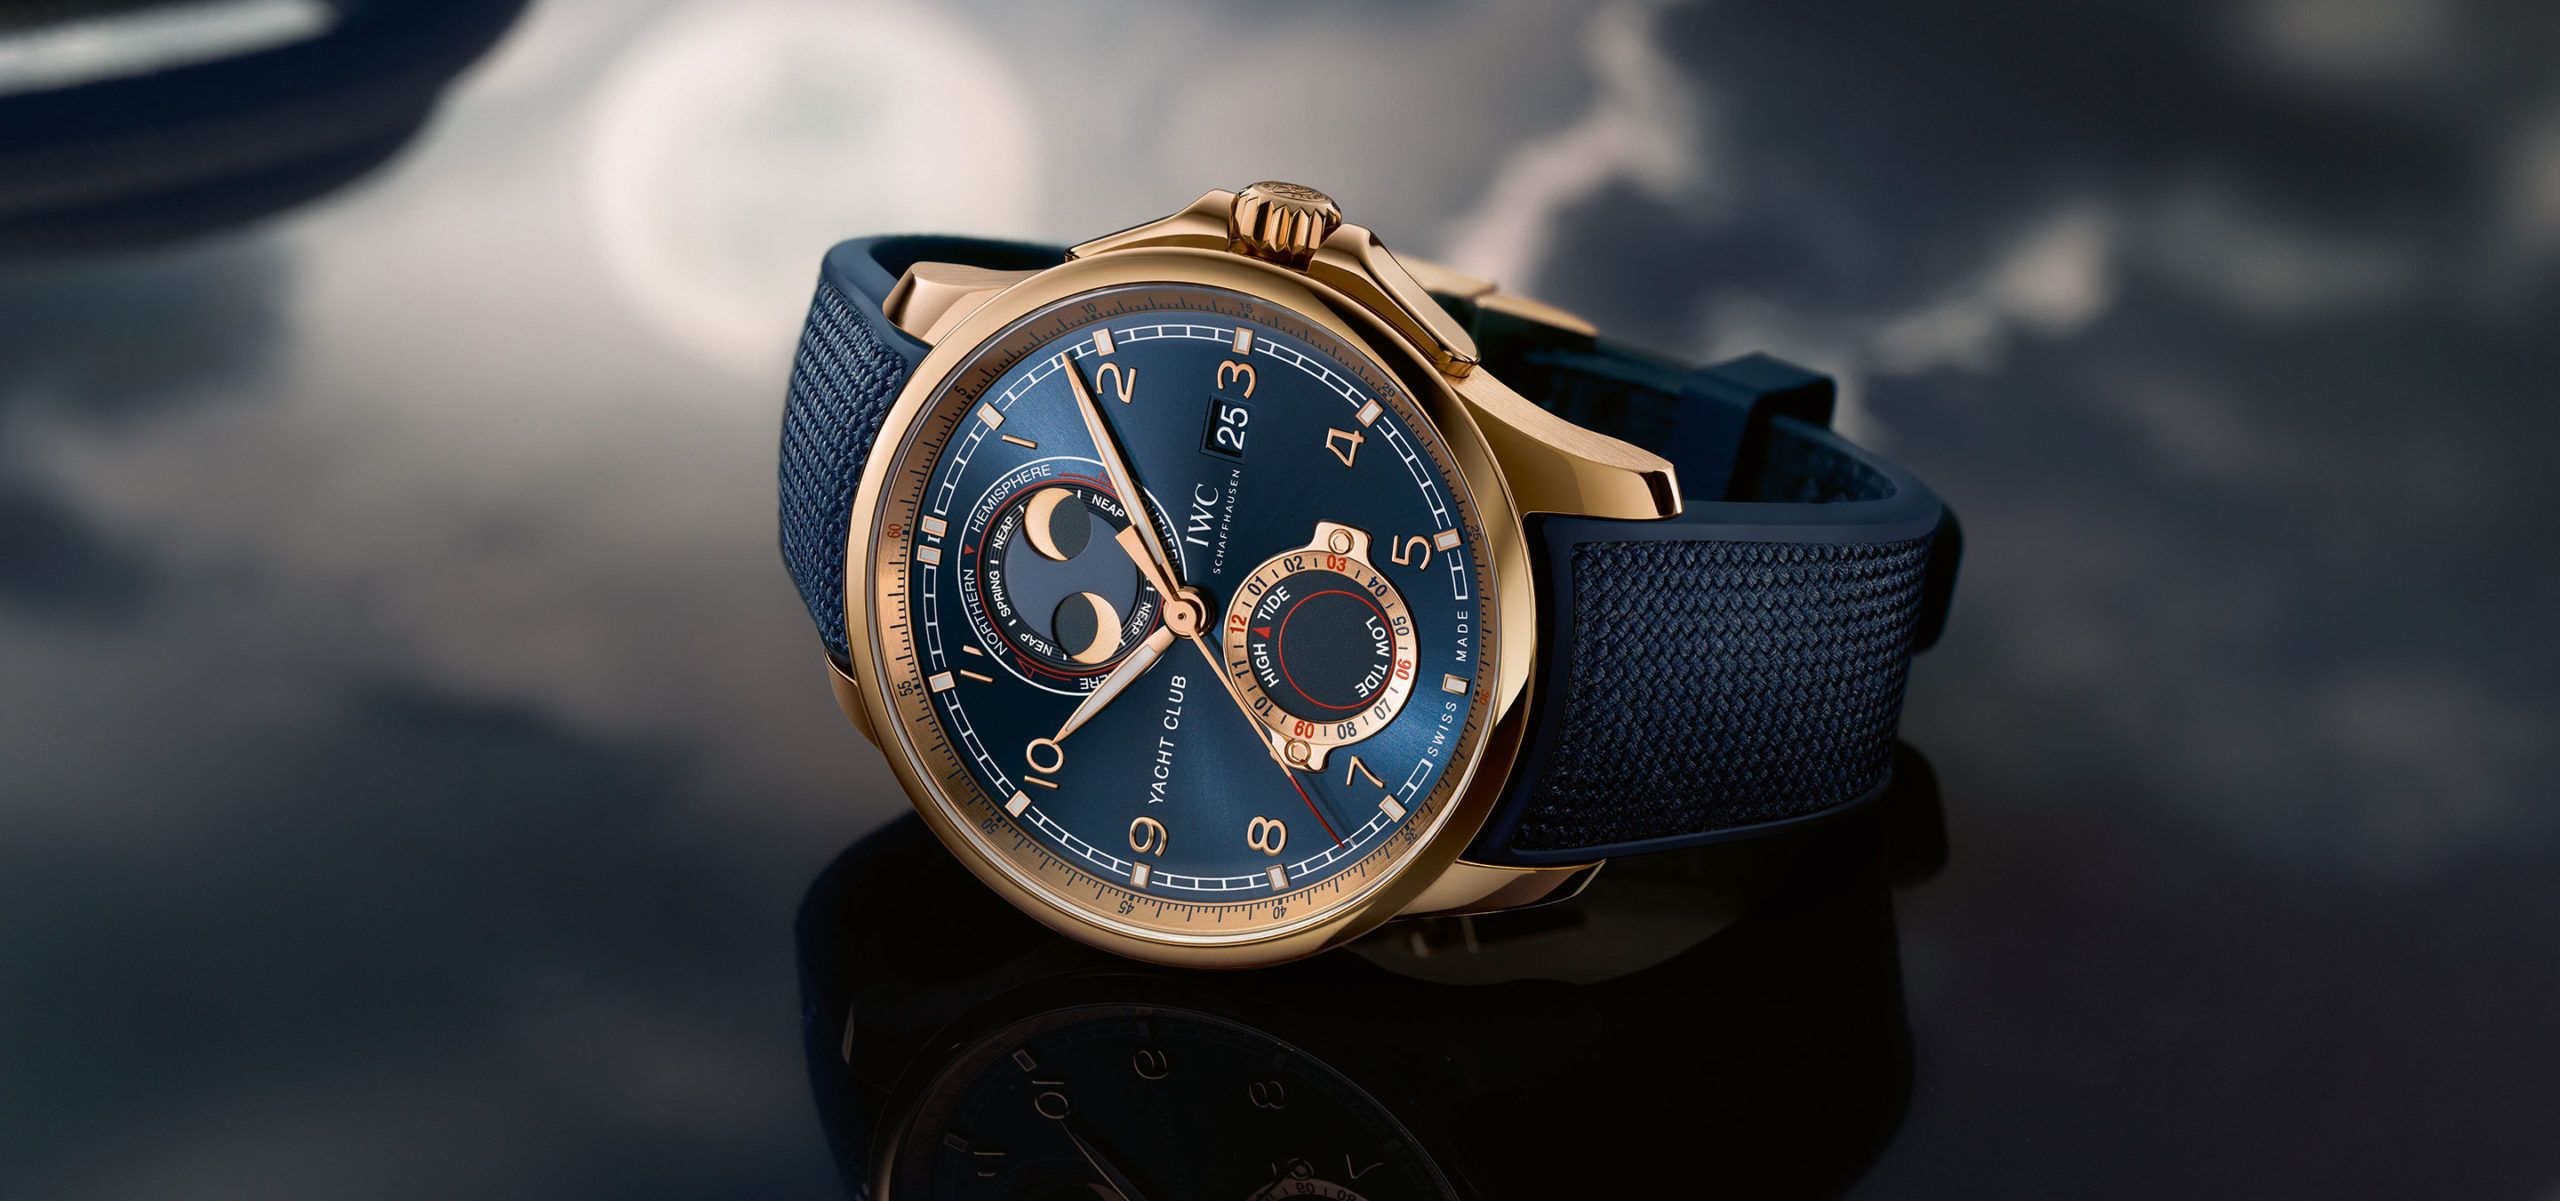 Join The Yacht Club With IWC’s Portugieser That Indicates Moon Phases And Tides